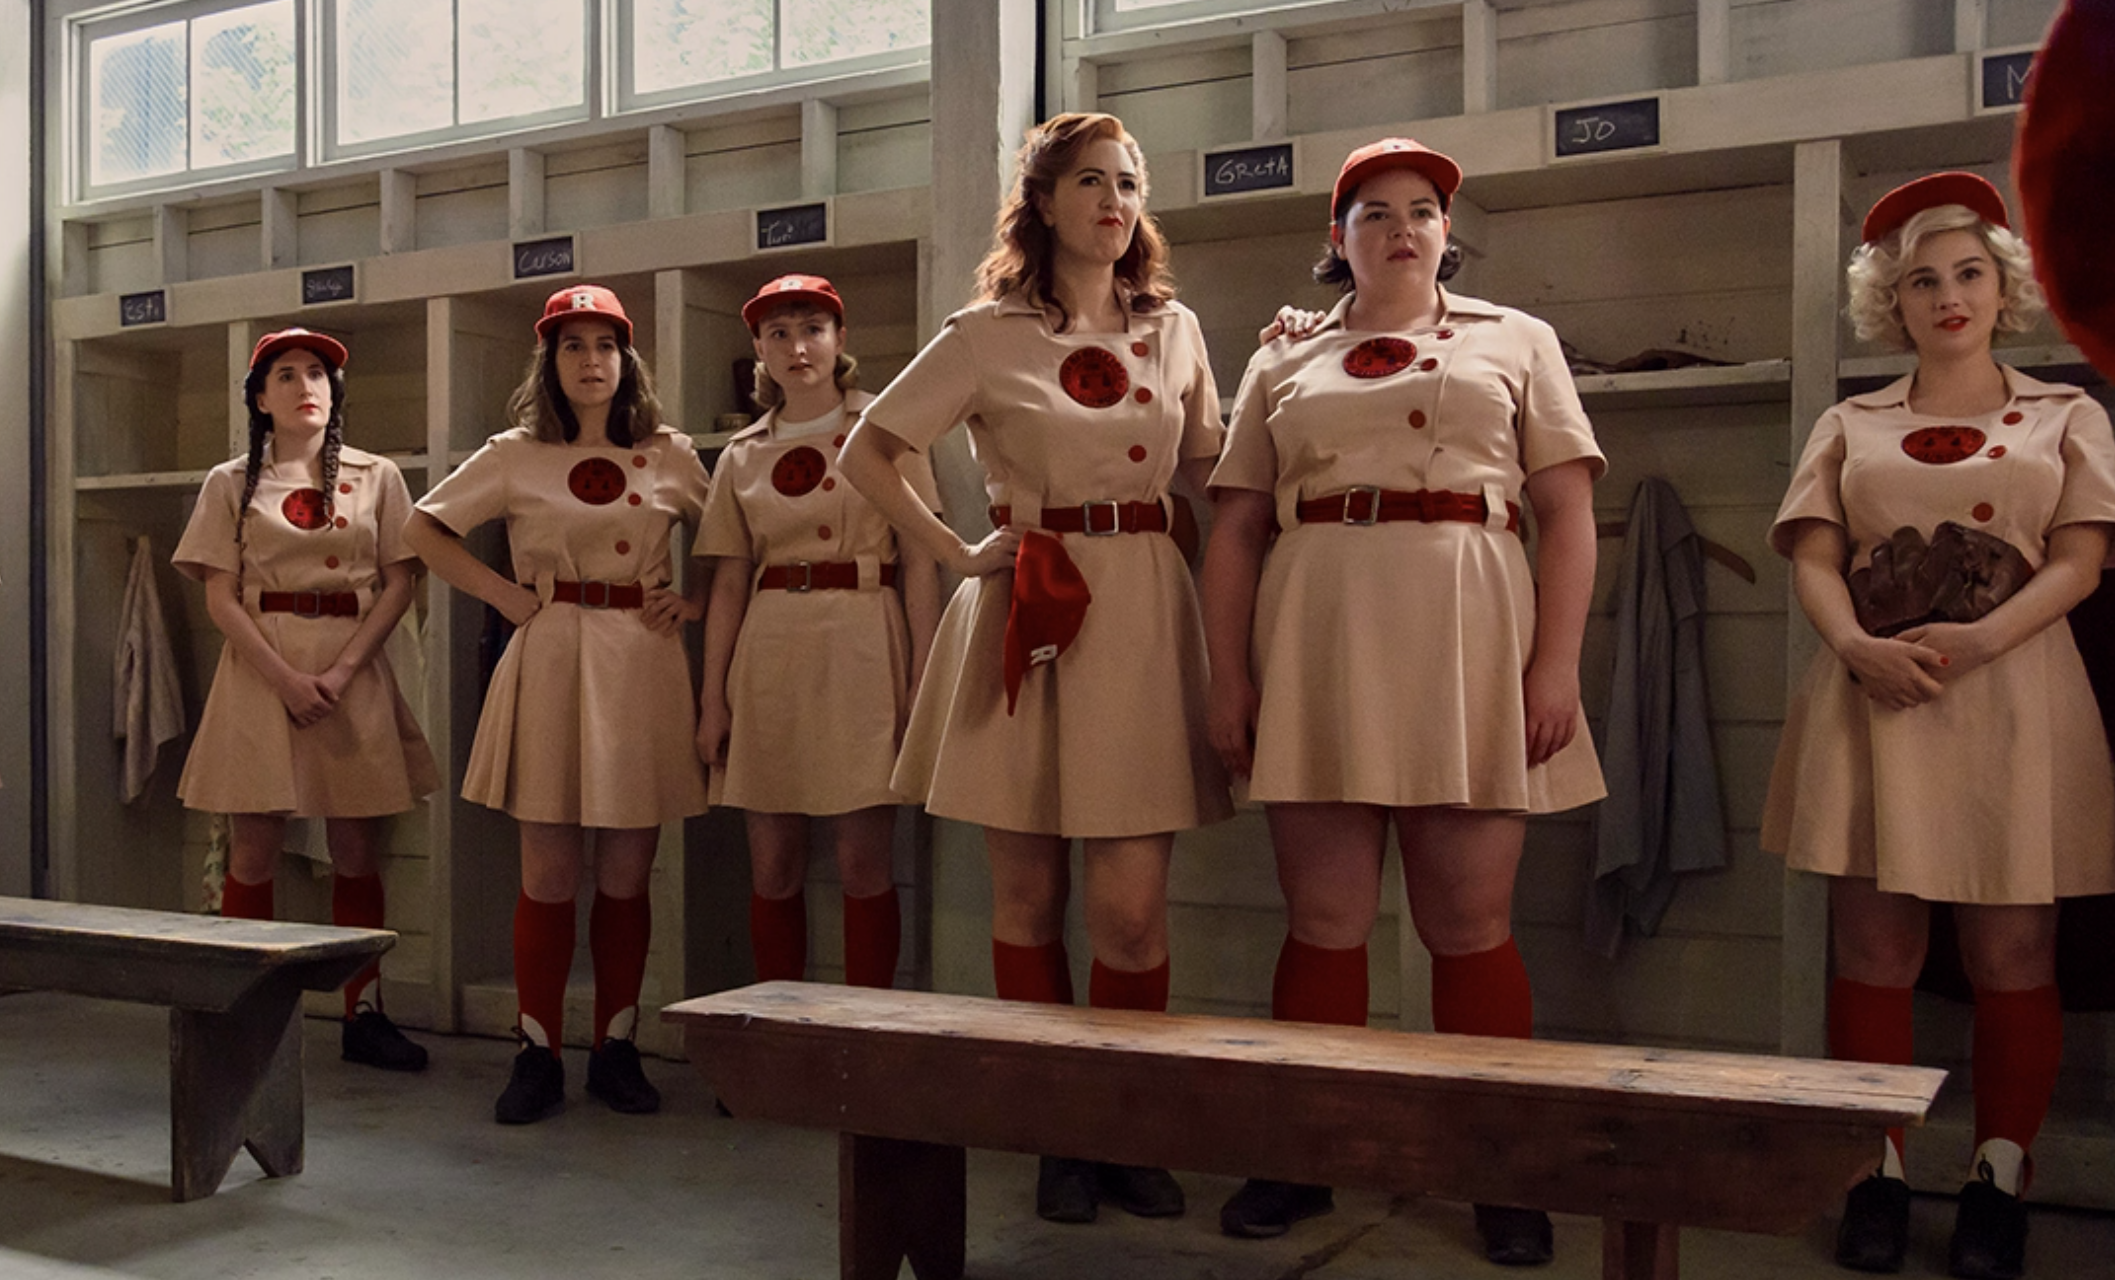 Several women in old fashioned baseball uniforms group together in a locker room